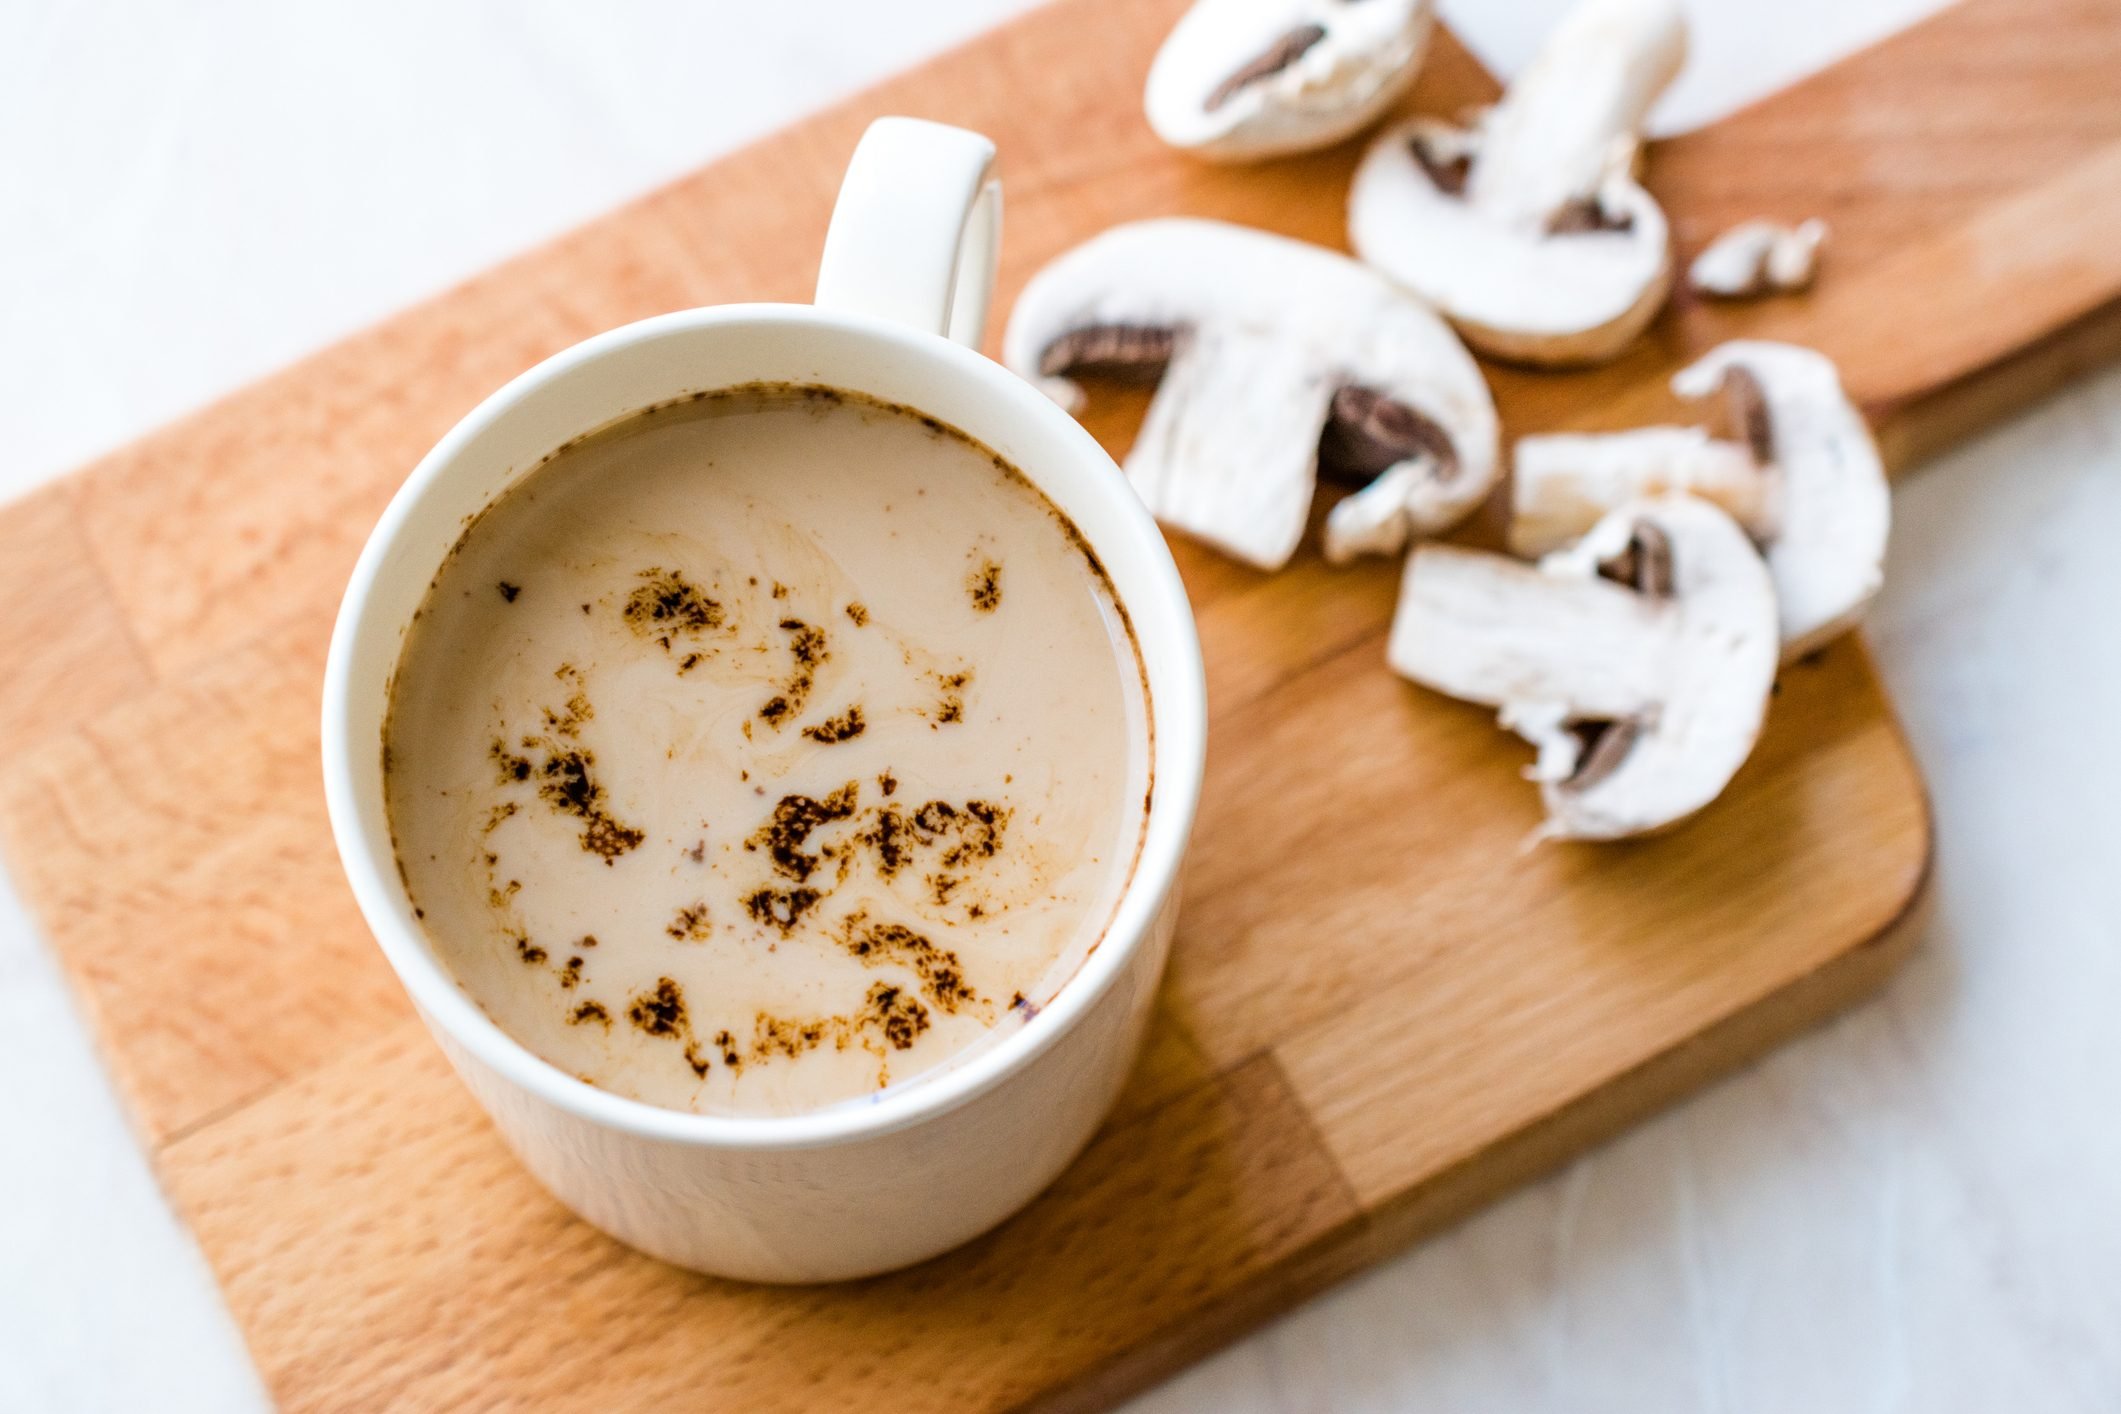 I Had Mushroom Coffee Every Day for a Week—Here's What Happened